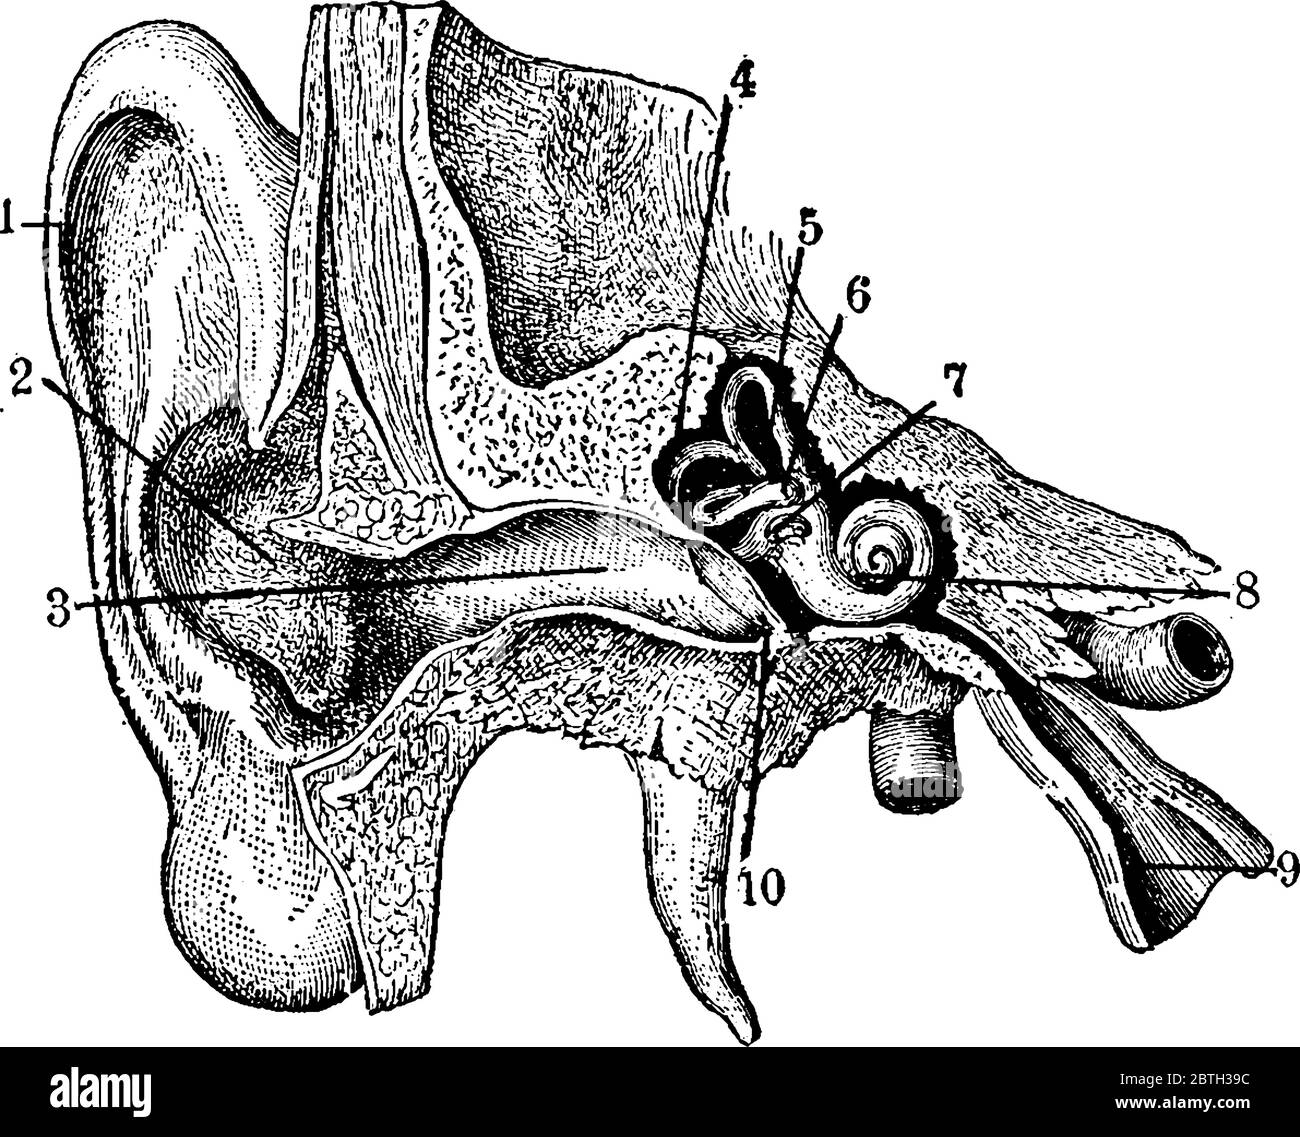 Ear Anatomy Diagram Black And White Stock Photos And Images Alamy